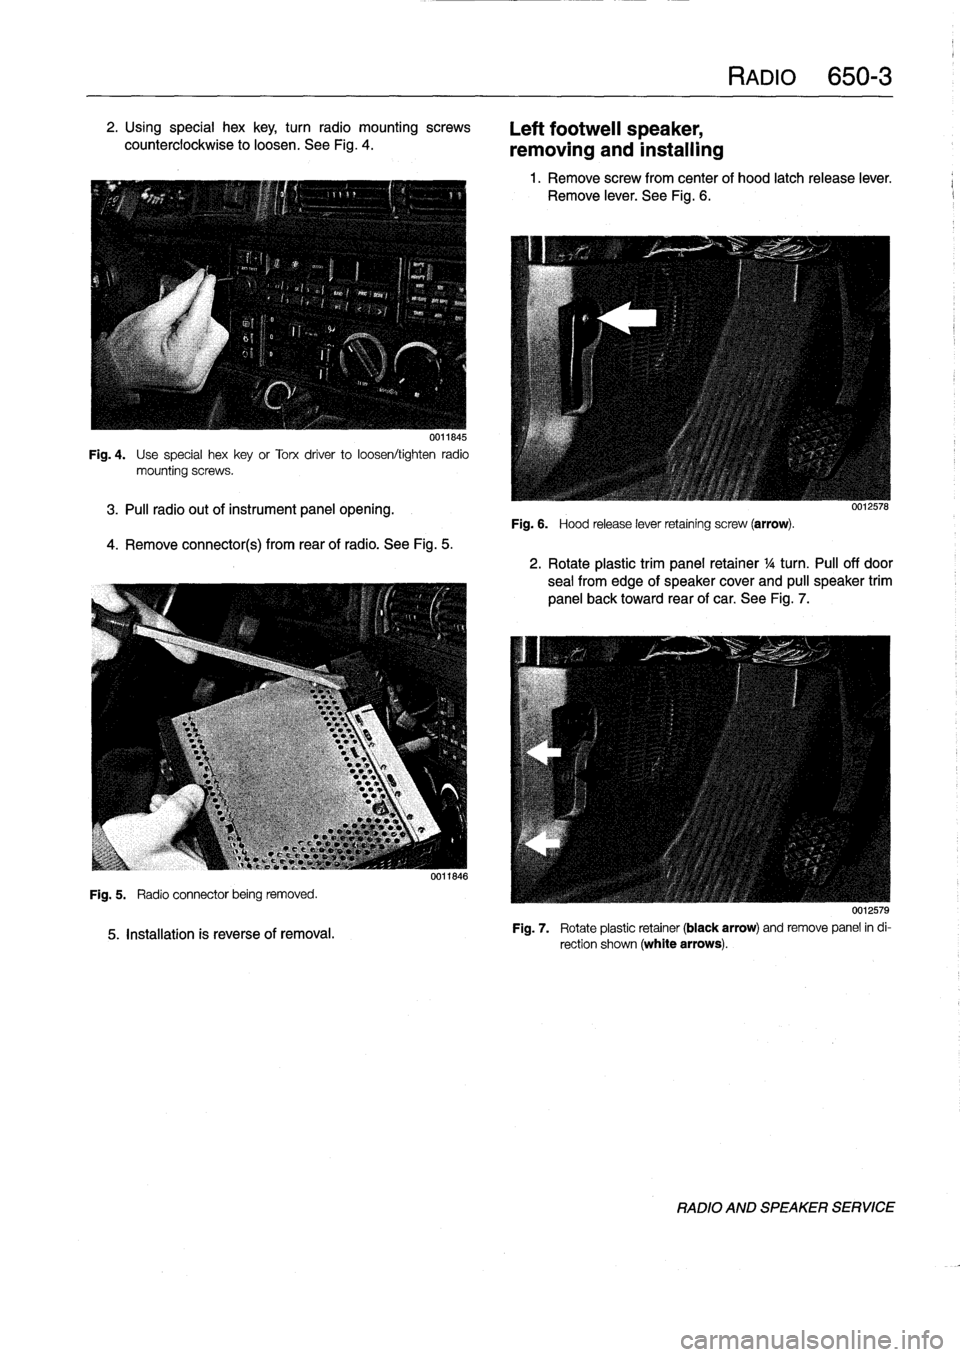 BMW 328i 1997 E36 User Guide 2
.
Using
special
hex
key,
turn
radio
mountingscrews

counterclockwise
to
loosen
.
See
Fig
.
4
.

0011845

Fig
.
4
.

	

Use
special
hexkey
or
Torx
driver
to
loosen/tighten
radio
mountingscrews
.

3
.